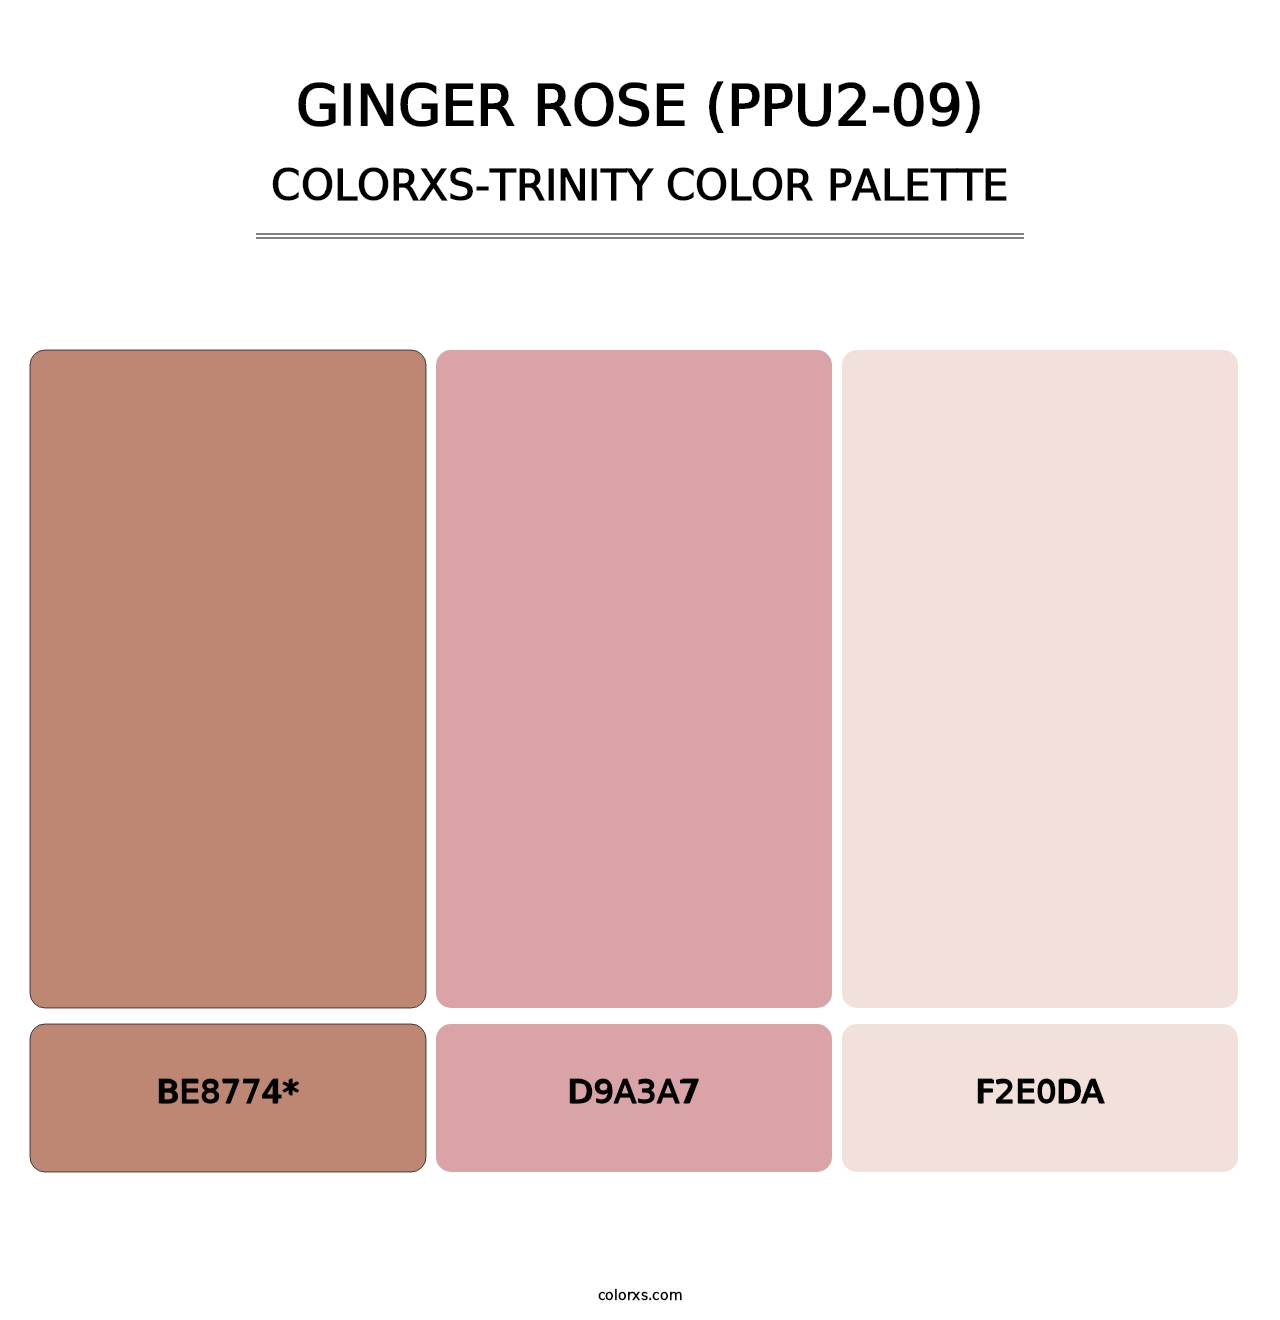 Ginger Rose (PPU2-09) - Colorxs Trinity Palette